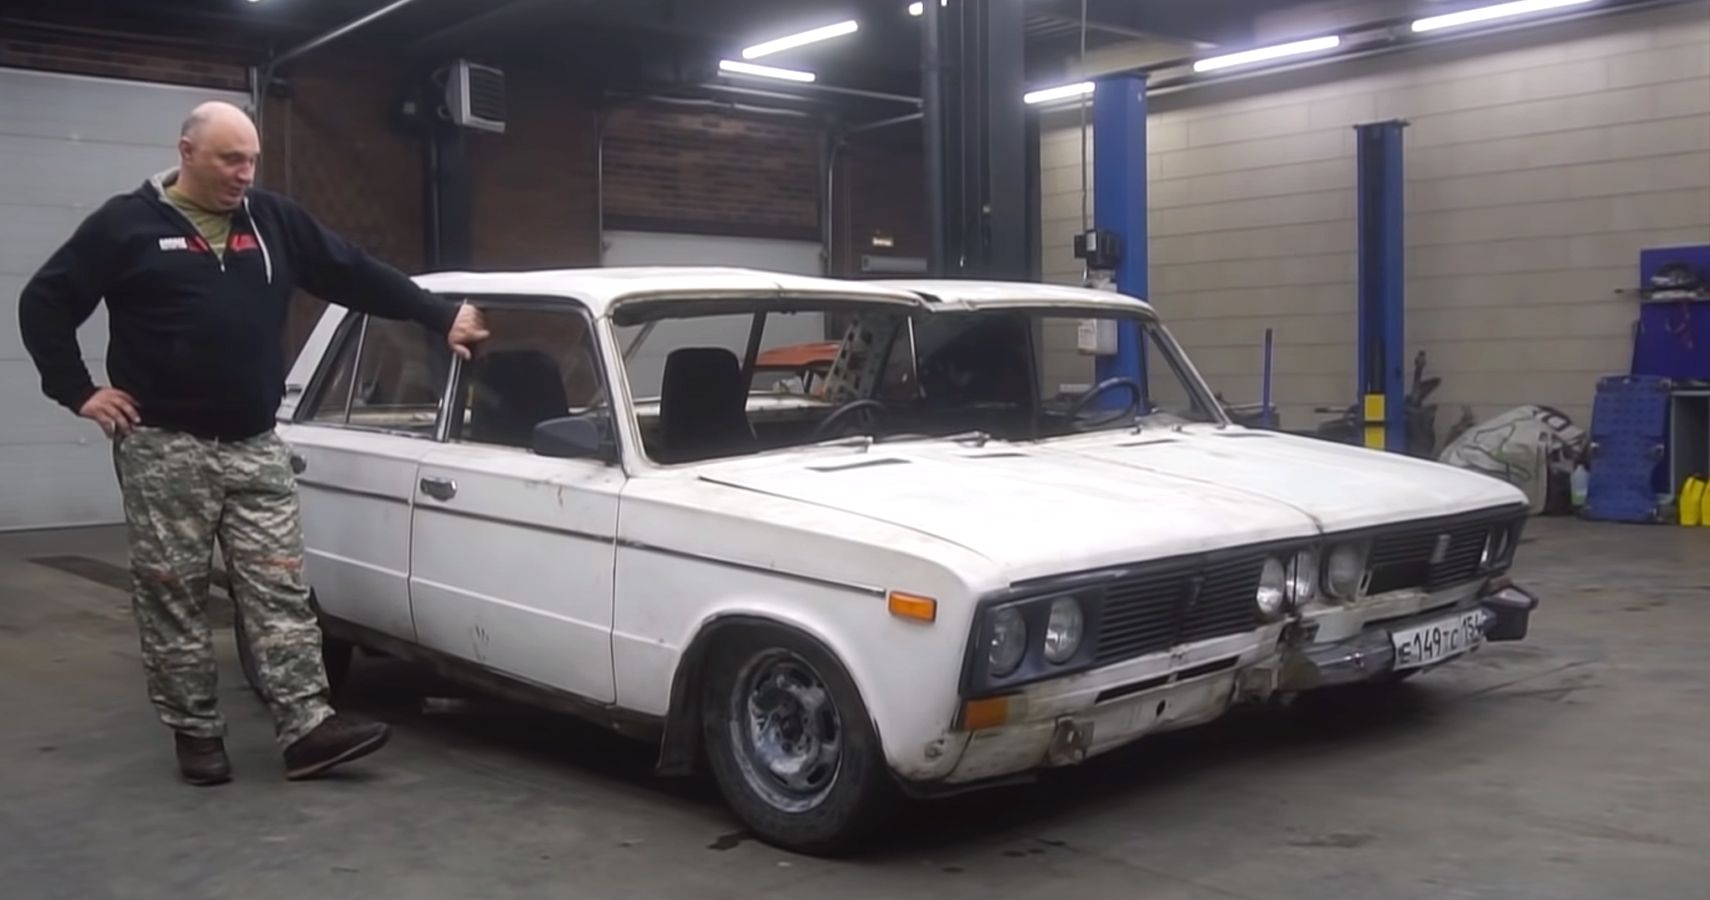 Mechanic from Garage 54 poses with two Ladas welded together